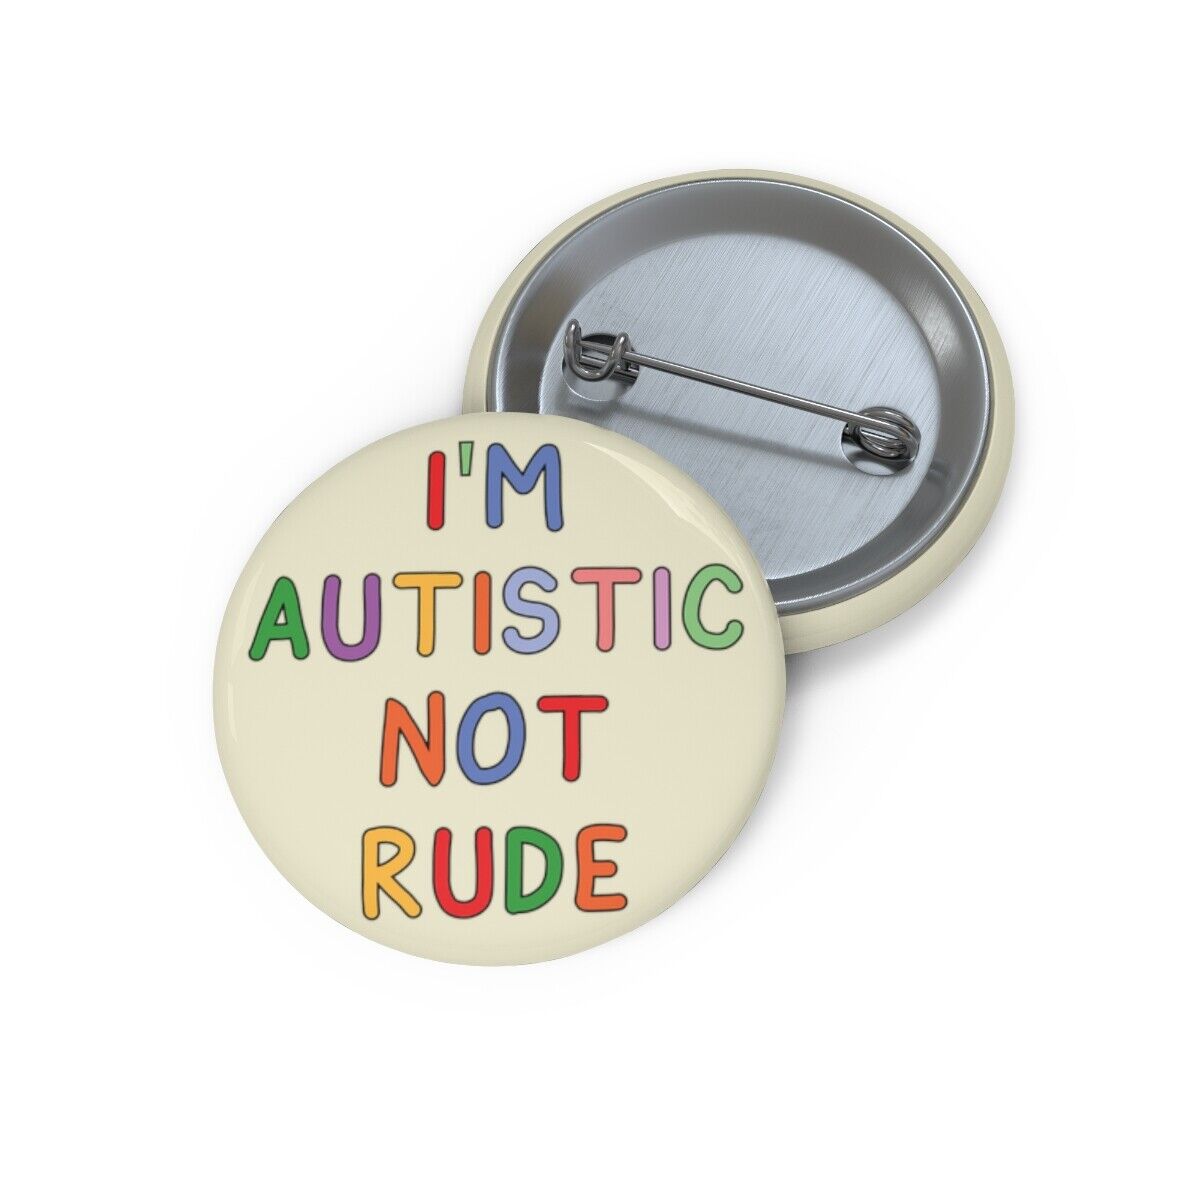 I'm Autistic Not Rude - Badge Pin Button